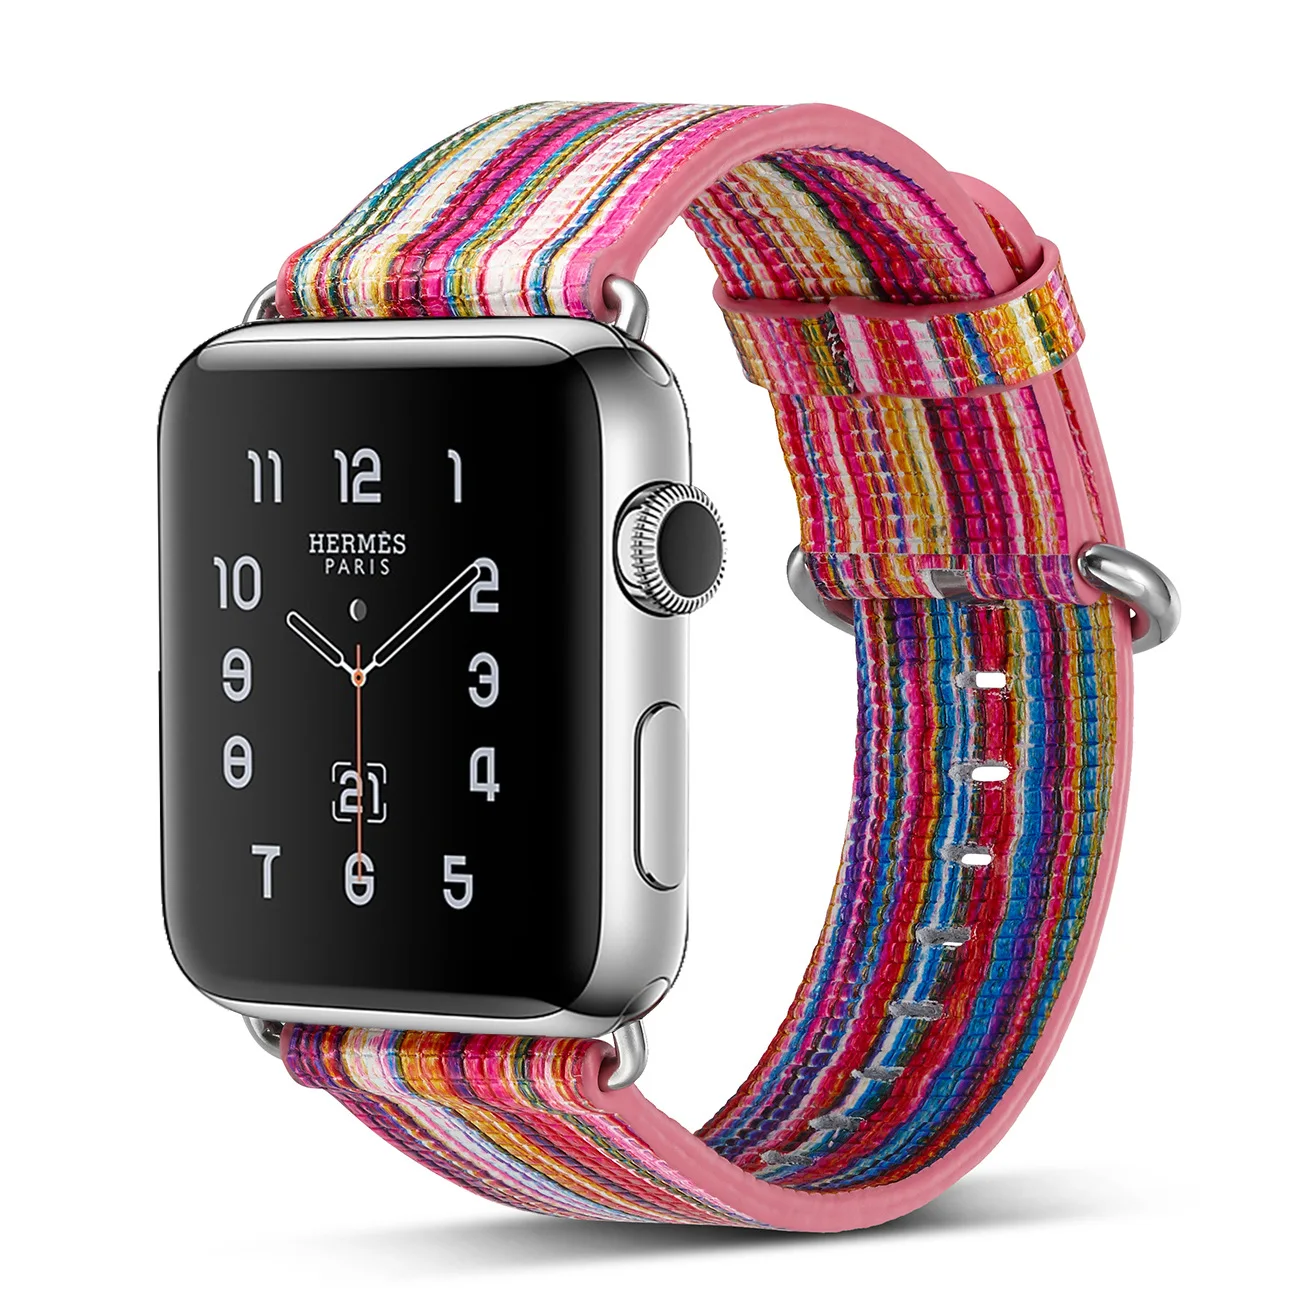 New Colorful Multicolor Band for Apple Watch band 42mm 38mm Bracelet